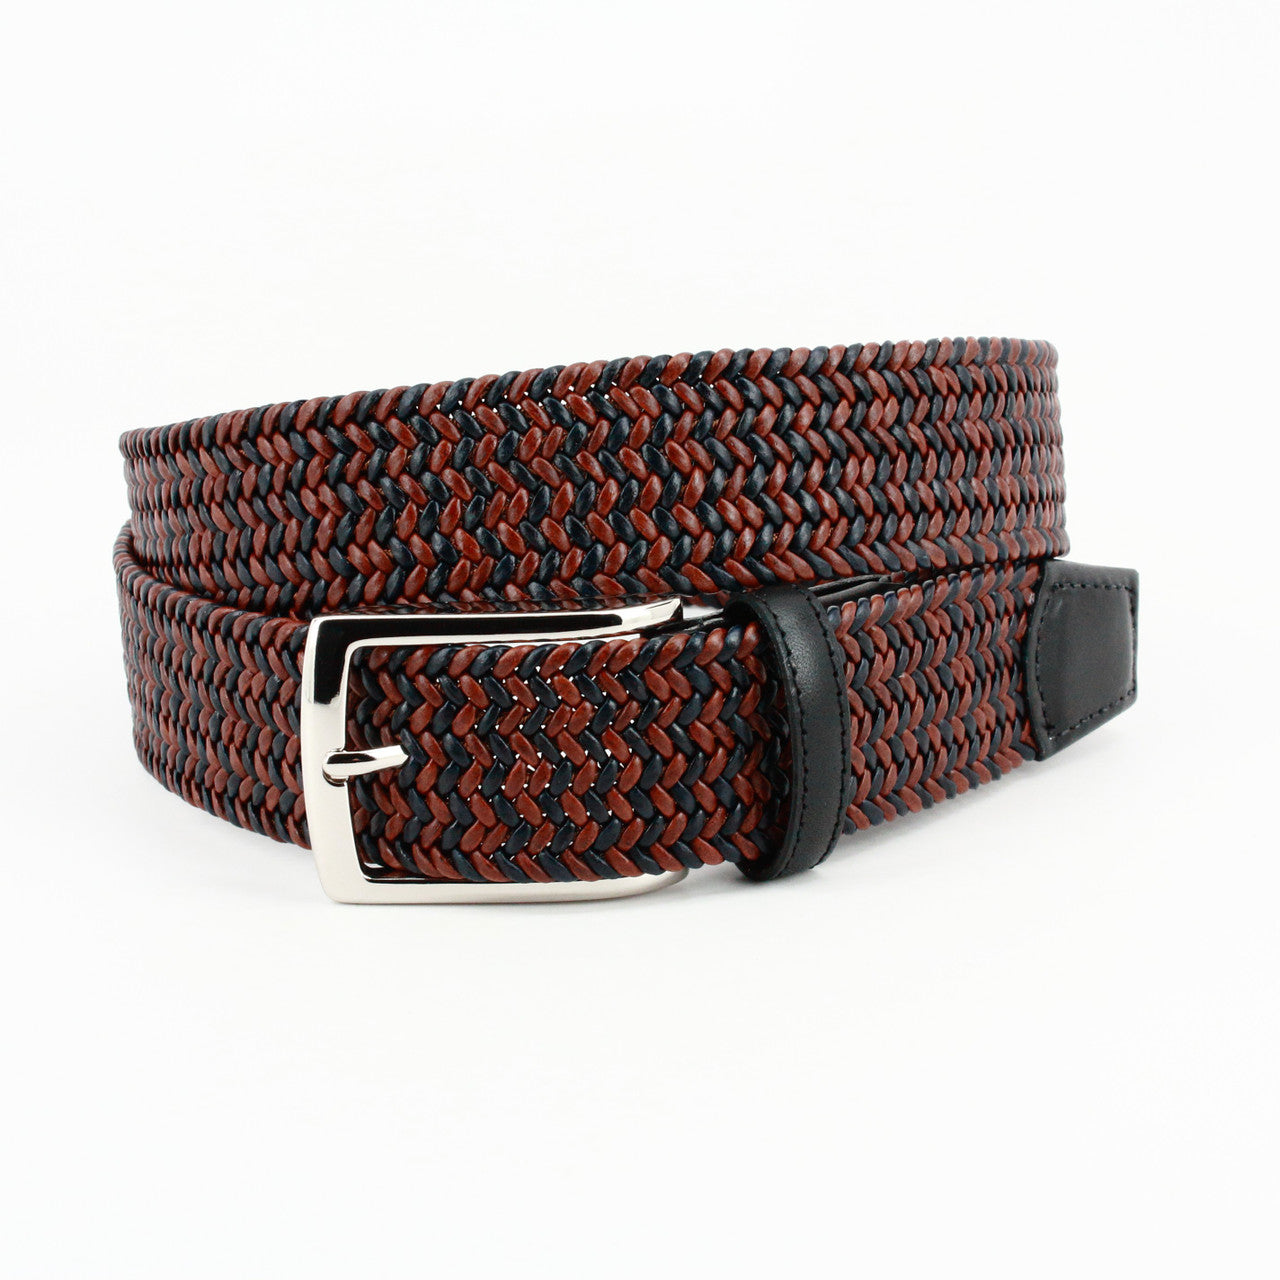 Italian Braided Stretch Leather Cording Belt in Black and Cognac by Torino Leather